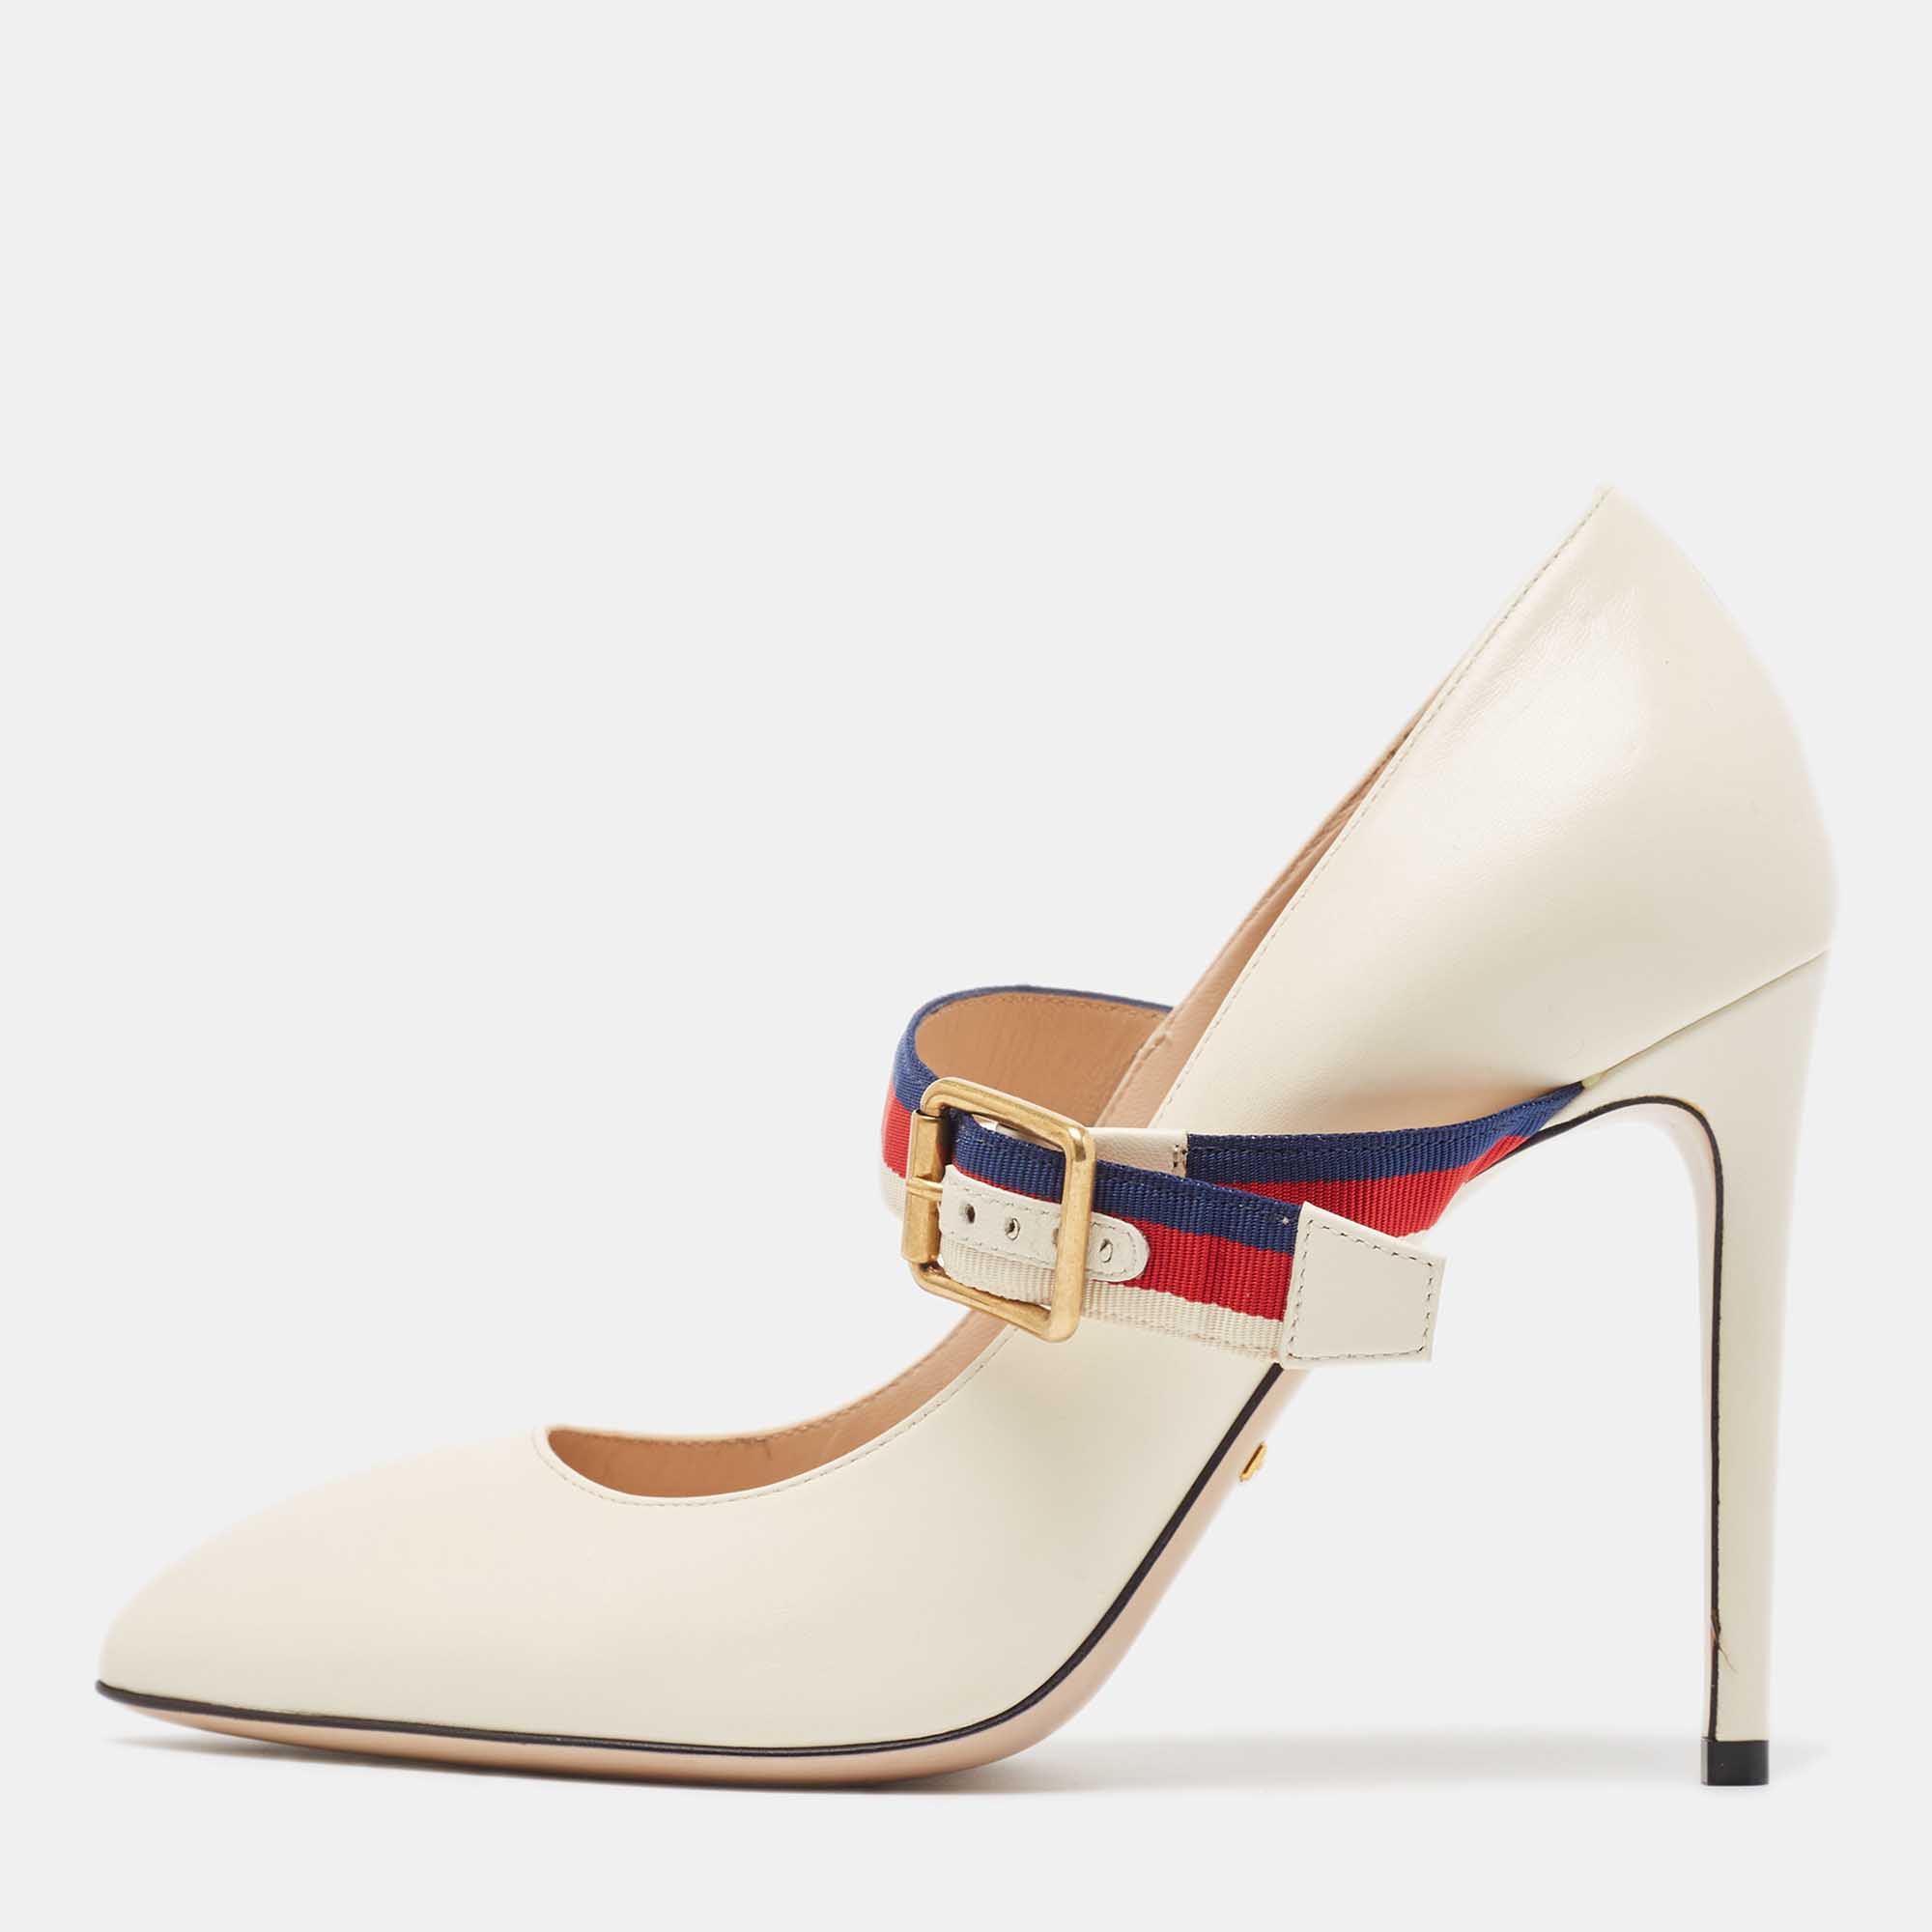 Gucci cream leather mary jane sylvie pumps size 38.5